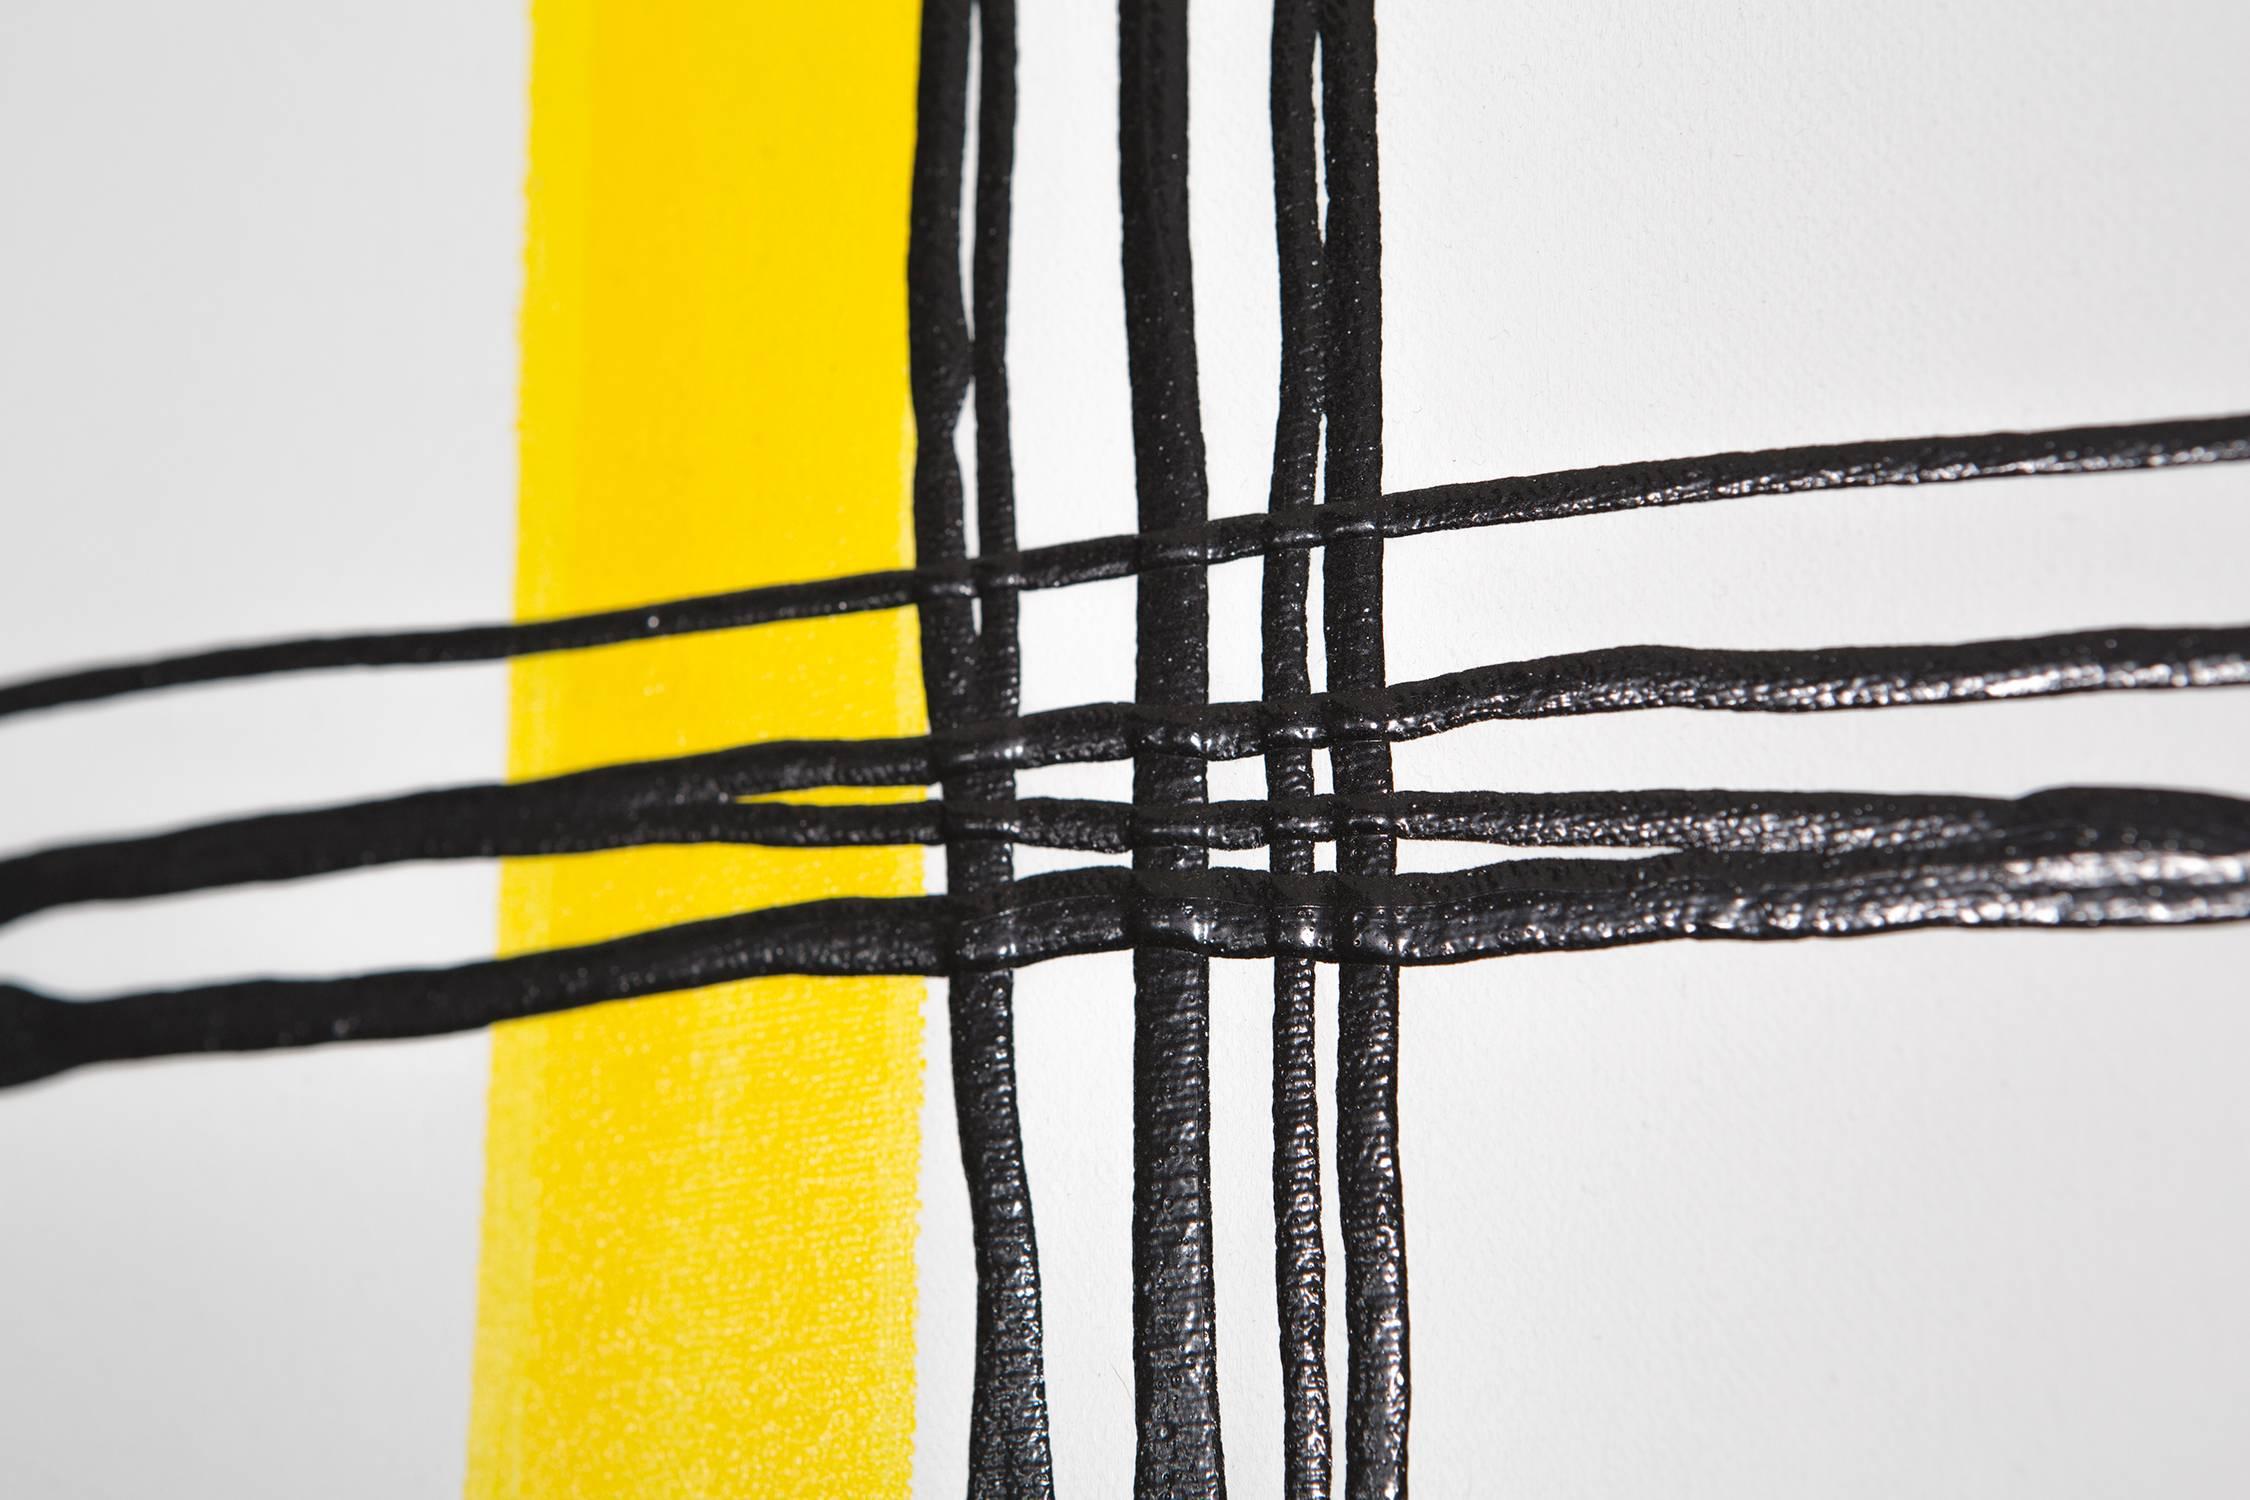 “Yellow Jacket” is a 2009 acrylic painting by Natasha Kohli. Kohli creates a grid of jagged black lines bringing static motion and variation to the canvas. A single stroke of a striking yellow gives this piece a feeling of liveliness.

Natasha